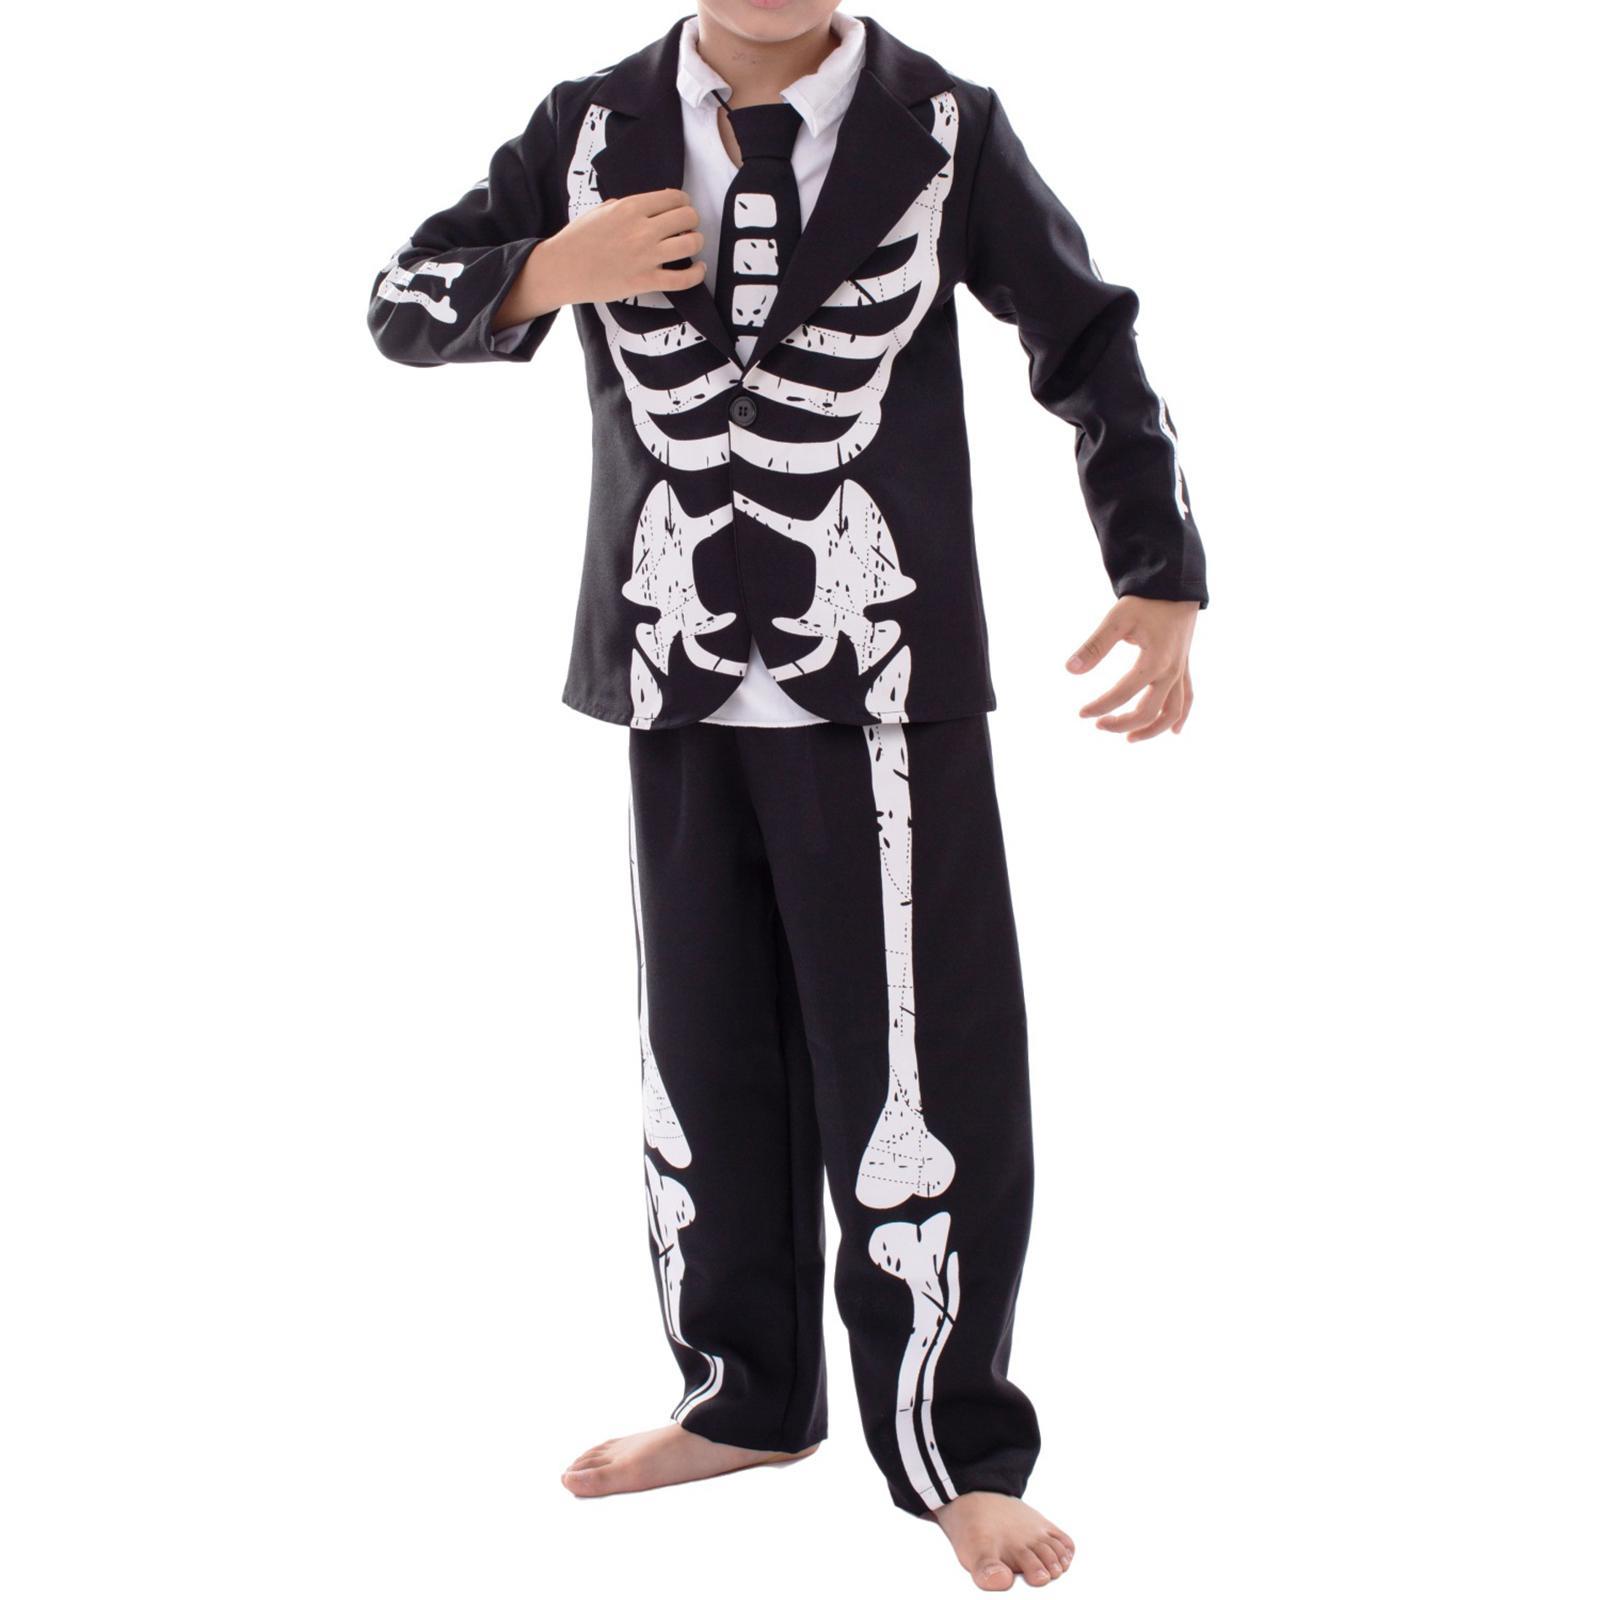 Costume Cosplay Outfit with Pants and Ties, Fancy Dress Halloween suits for Kids